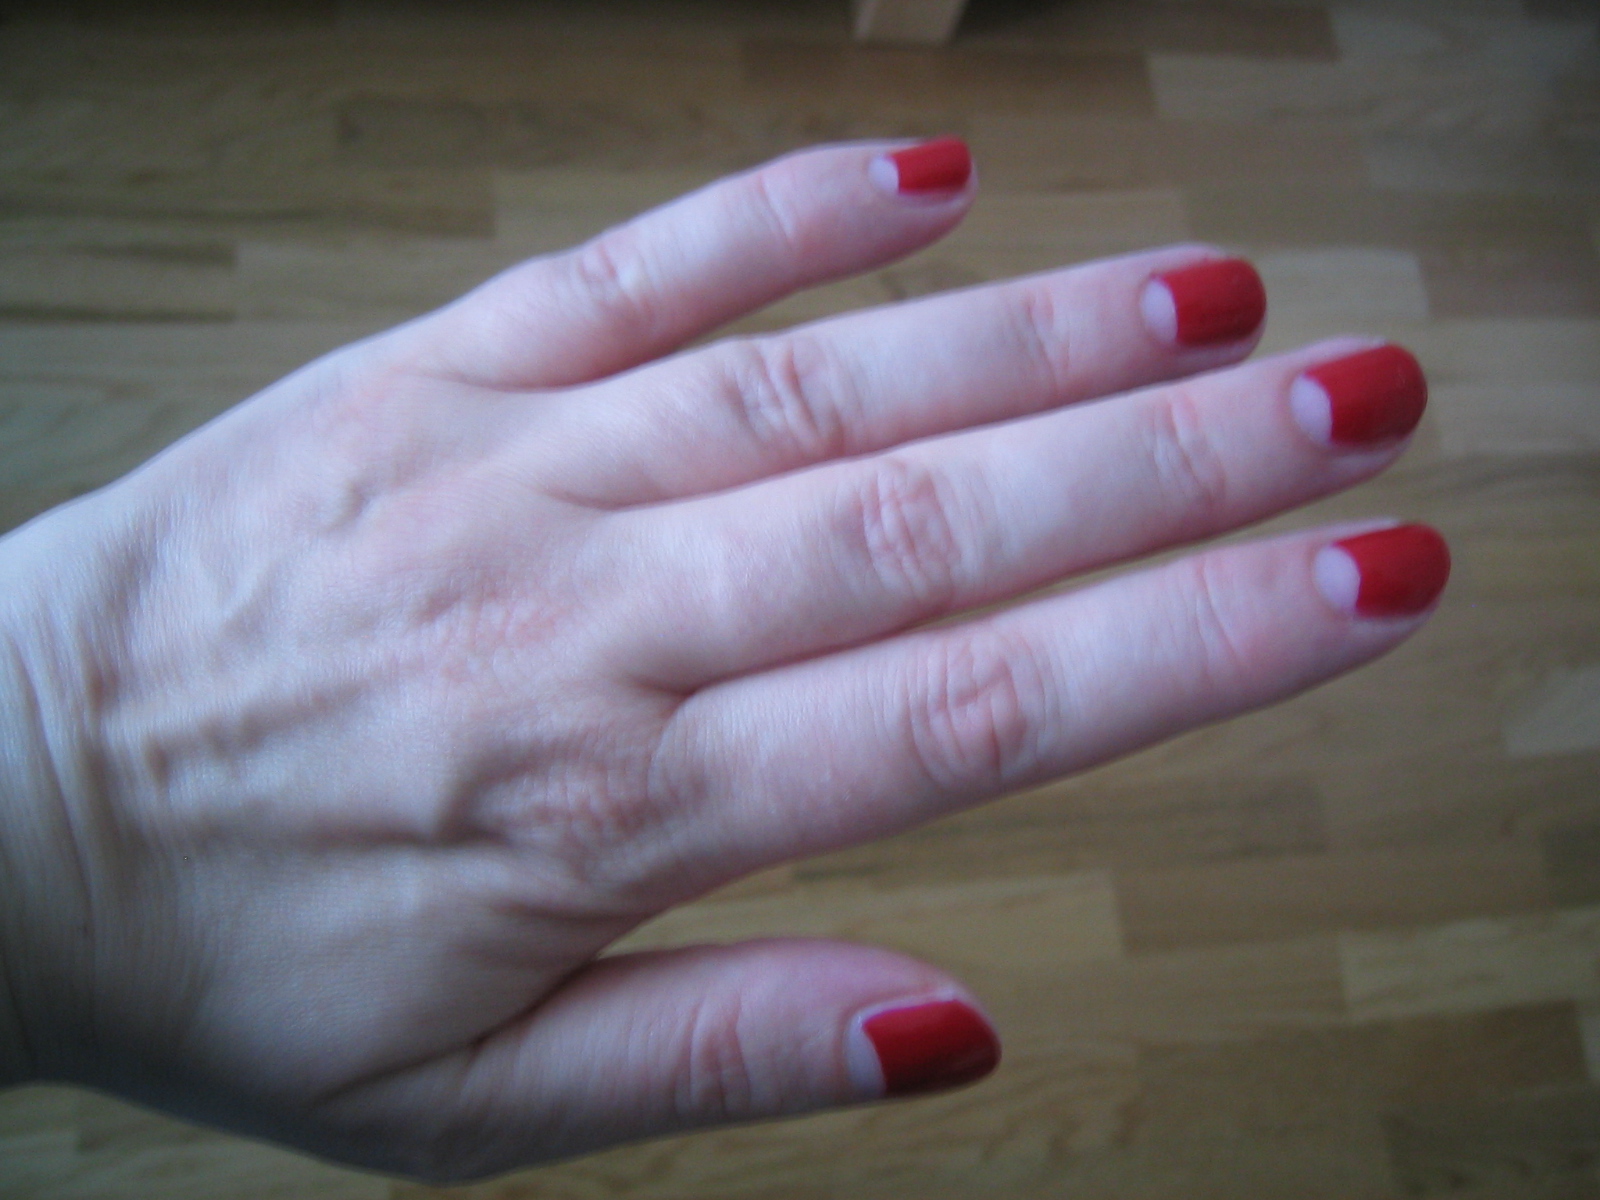 Fashionable Forties: 1940's manicure